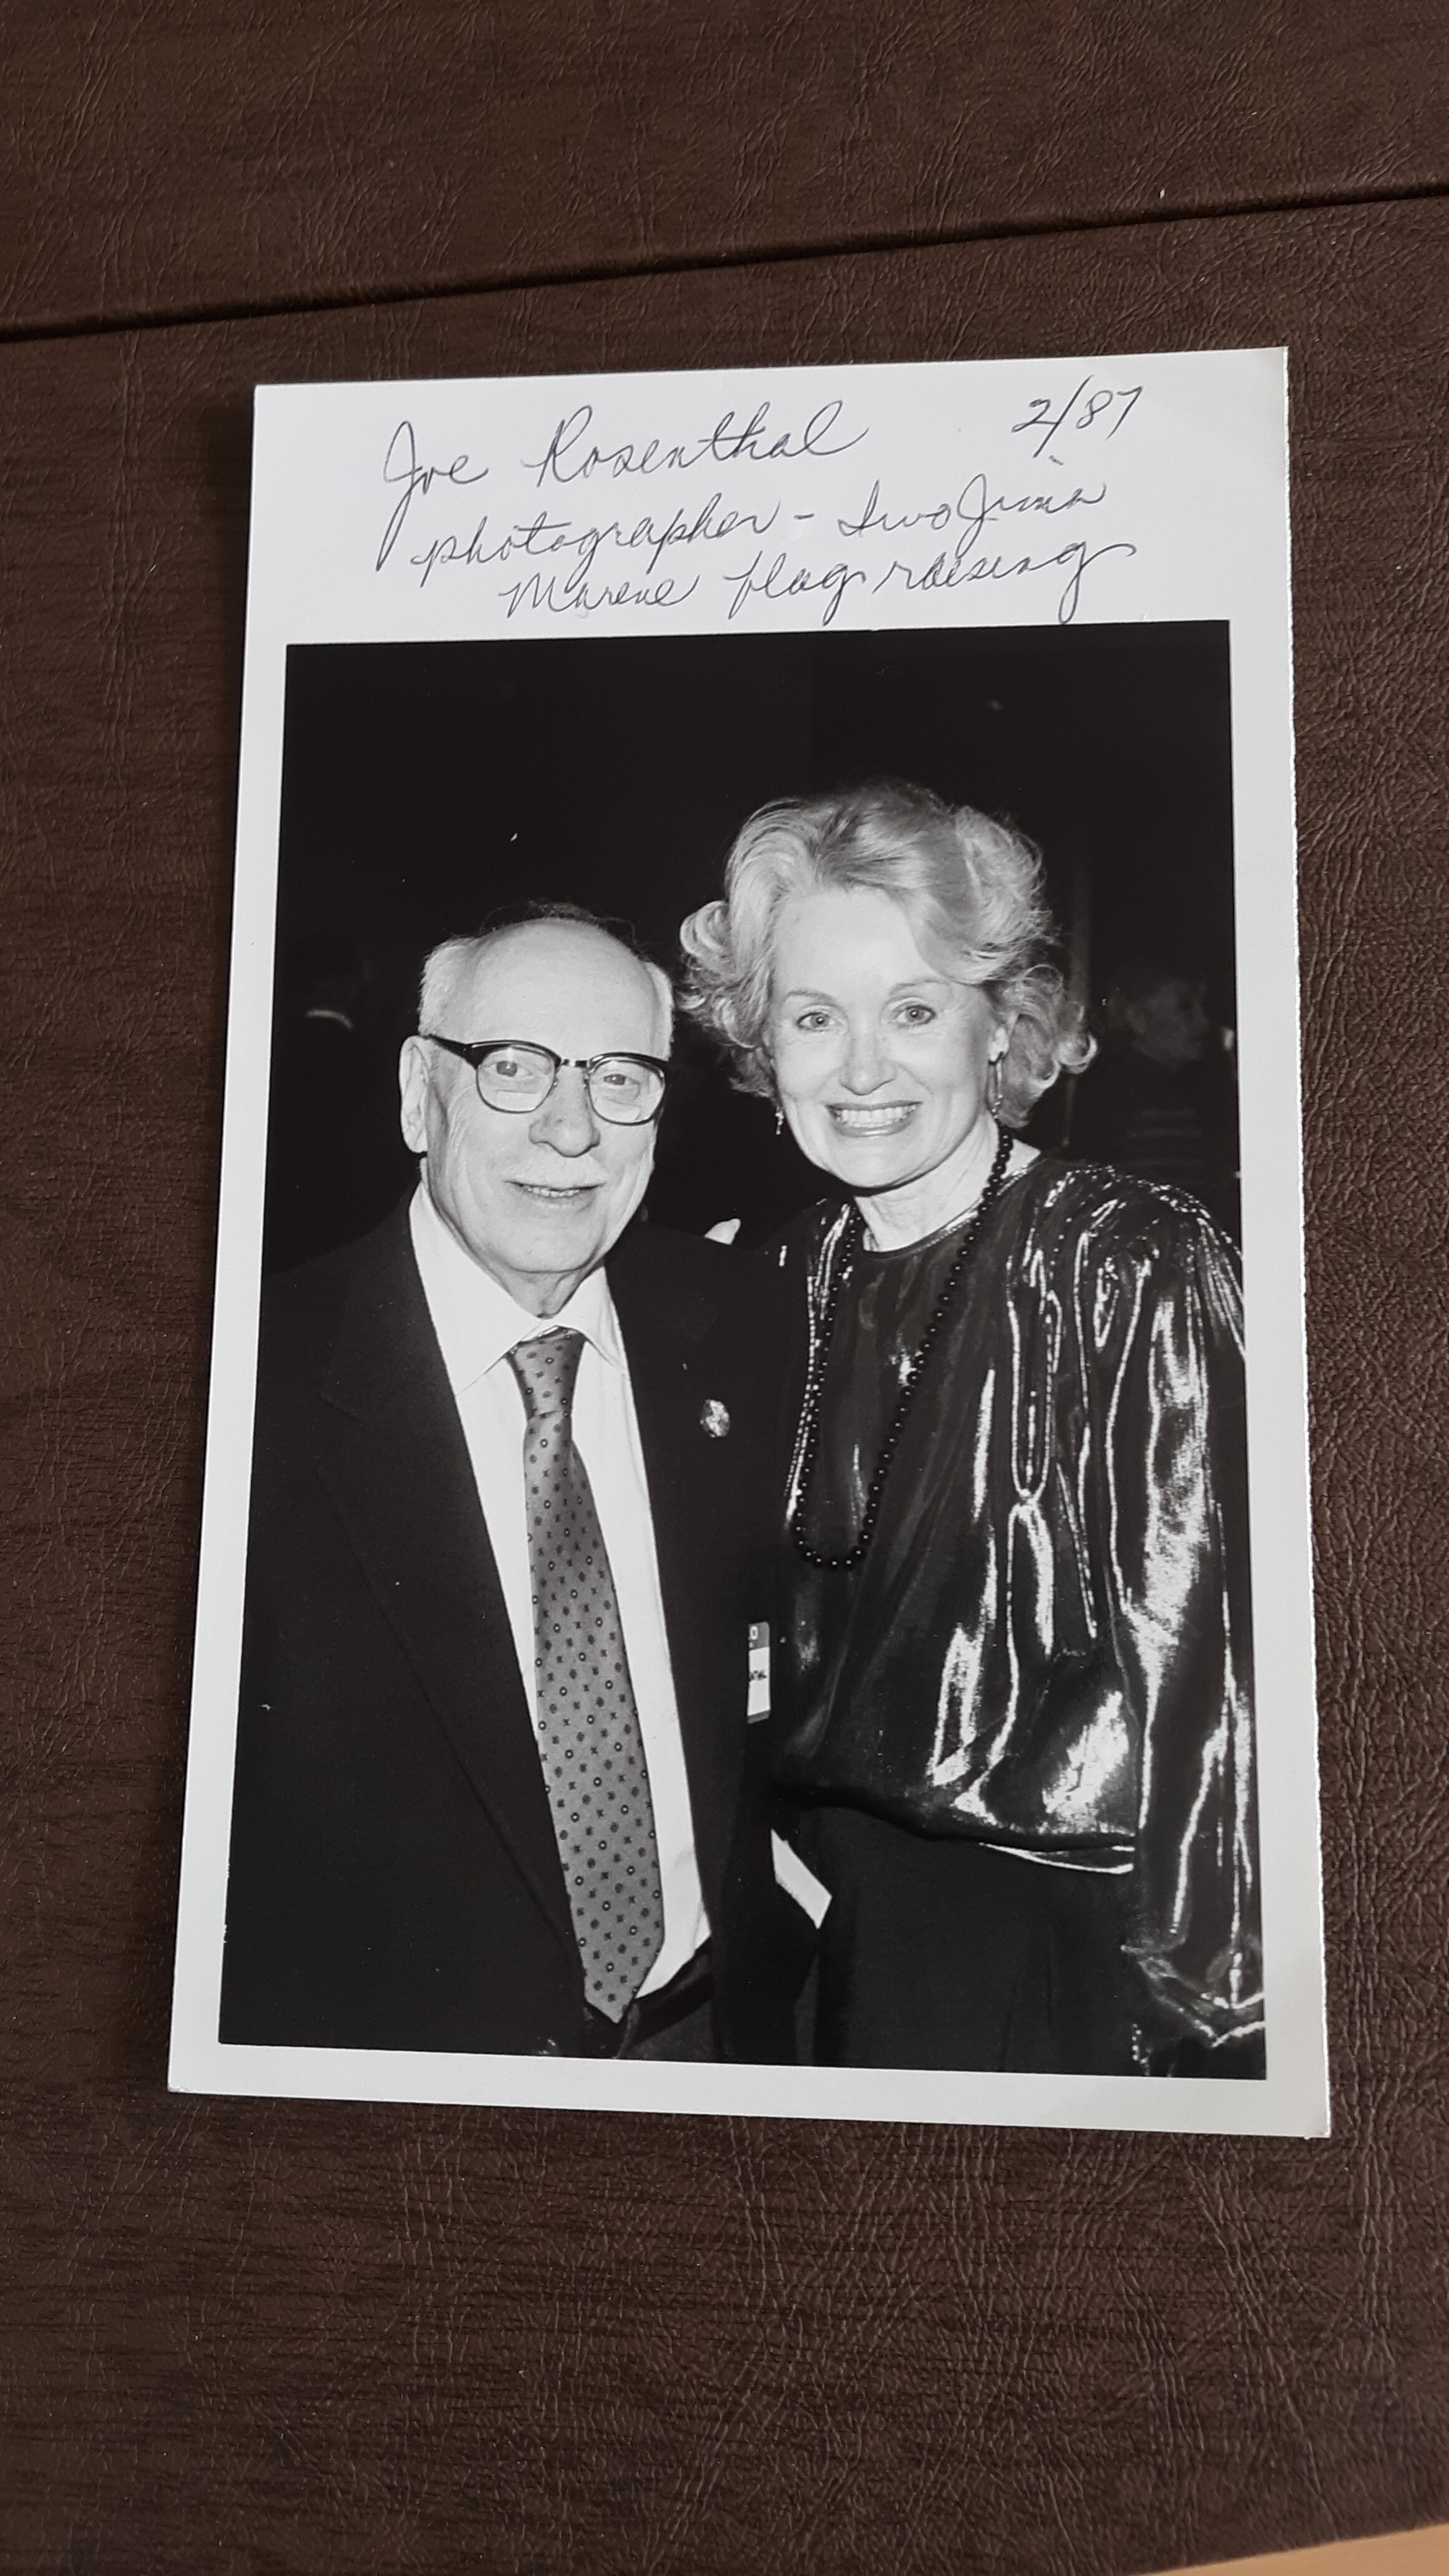 Joanna on February 1987 at a PPAGLA dinner met Joe Rosenthal, the photographer who snapped one of the most famous images of World War II.